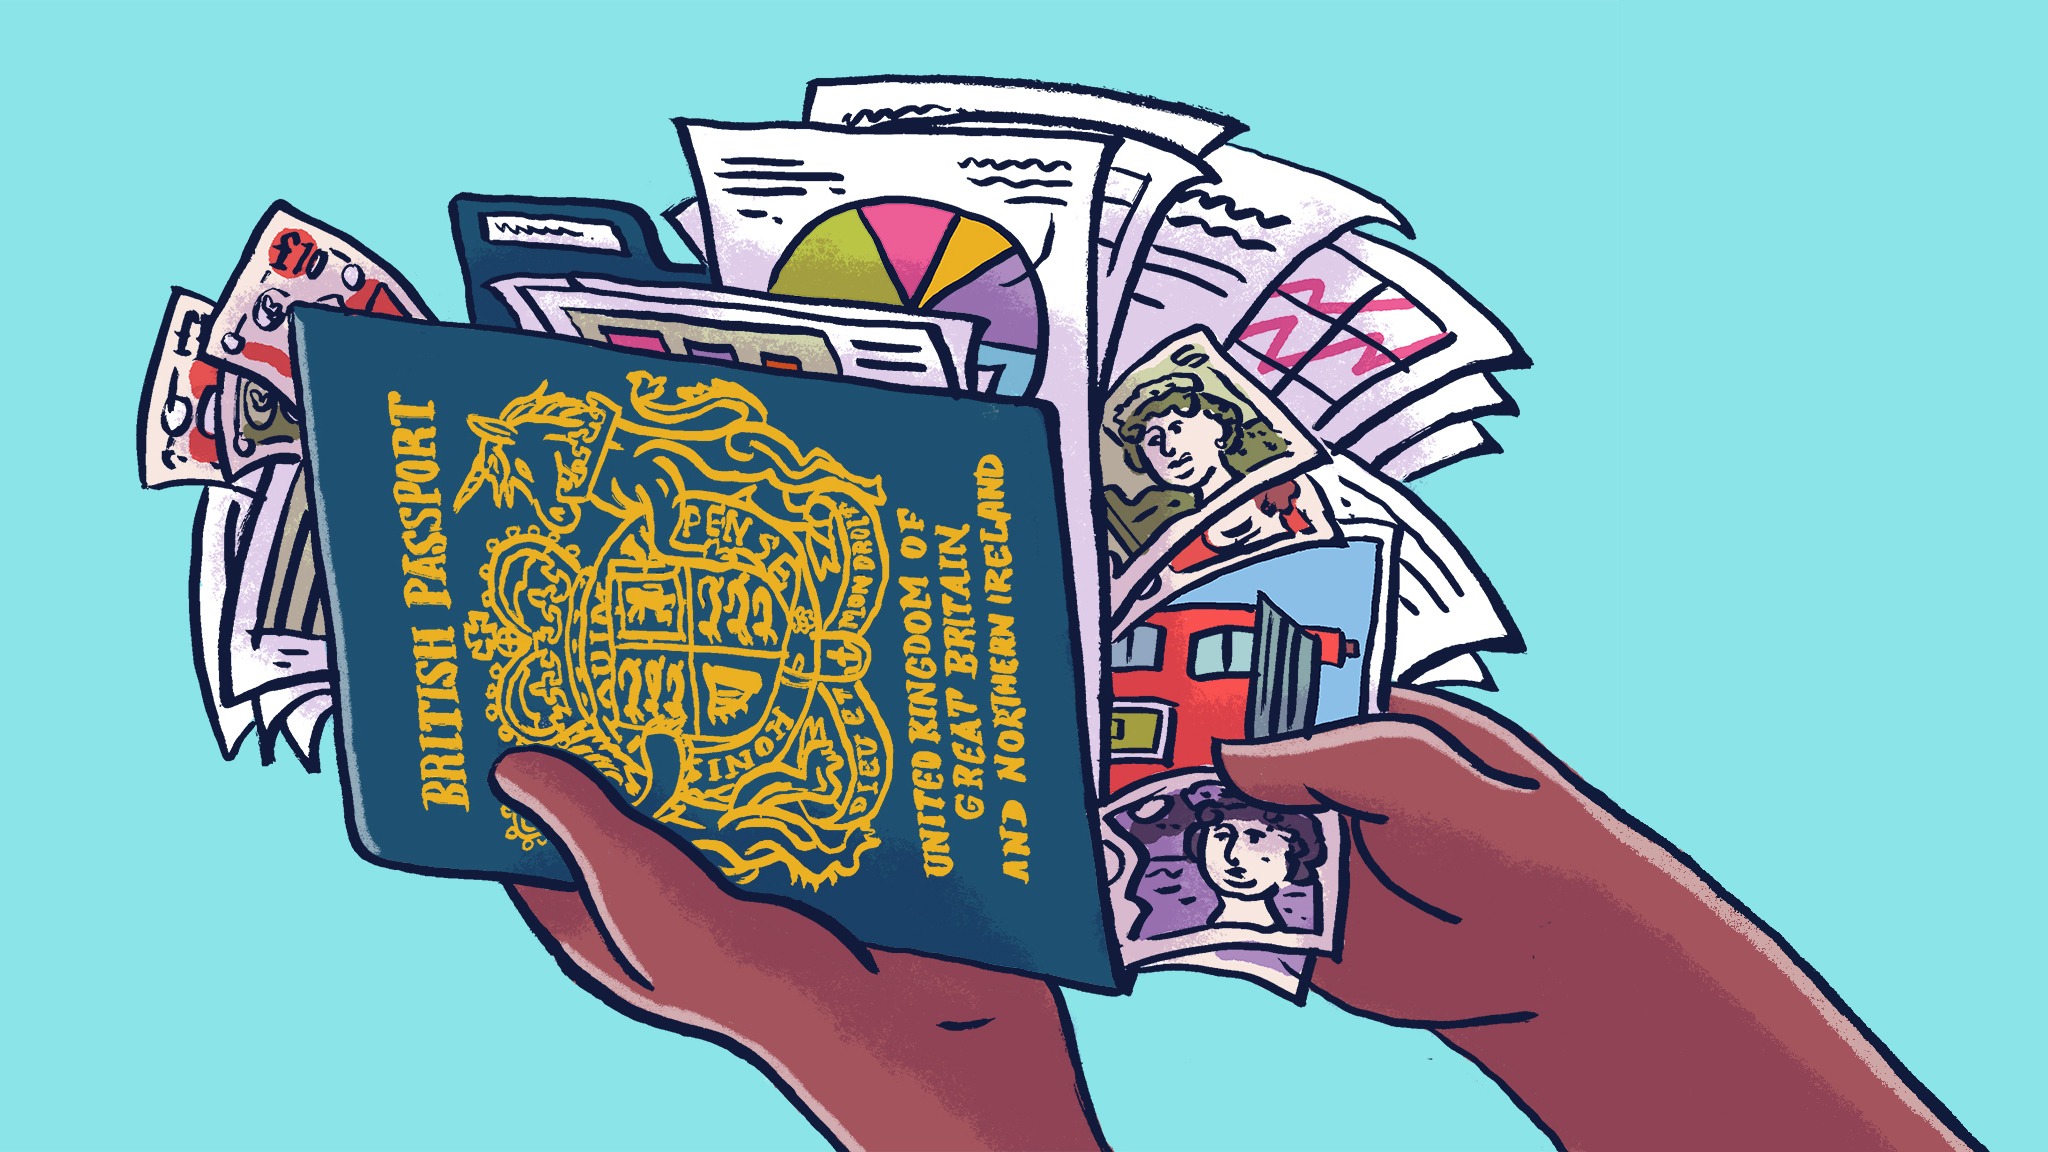 Submerged lever retort Six key issues for expats returning to the UK | Financial Times